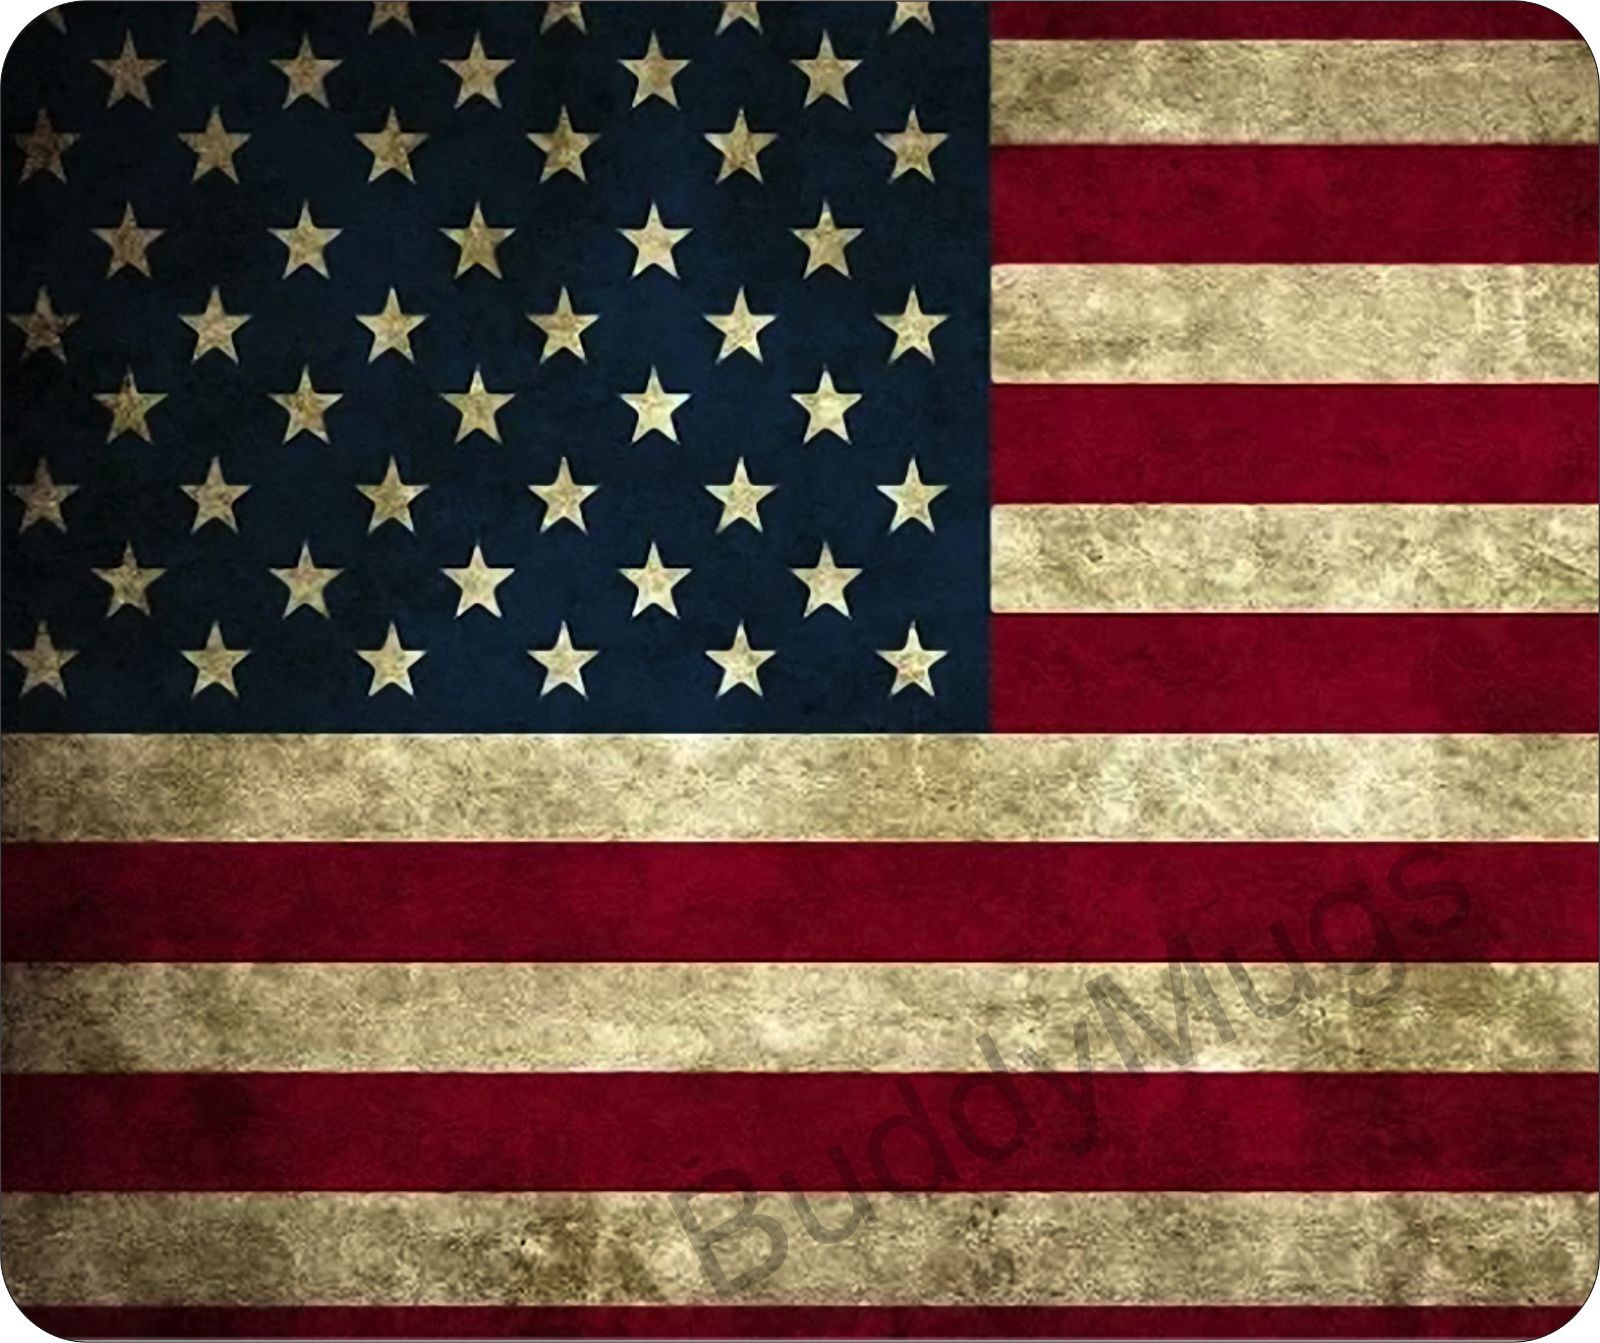 New Mousepad Large Flag American USA Mouse Pad For Laptop Computer Gaming Mp3